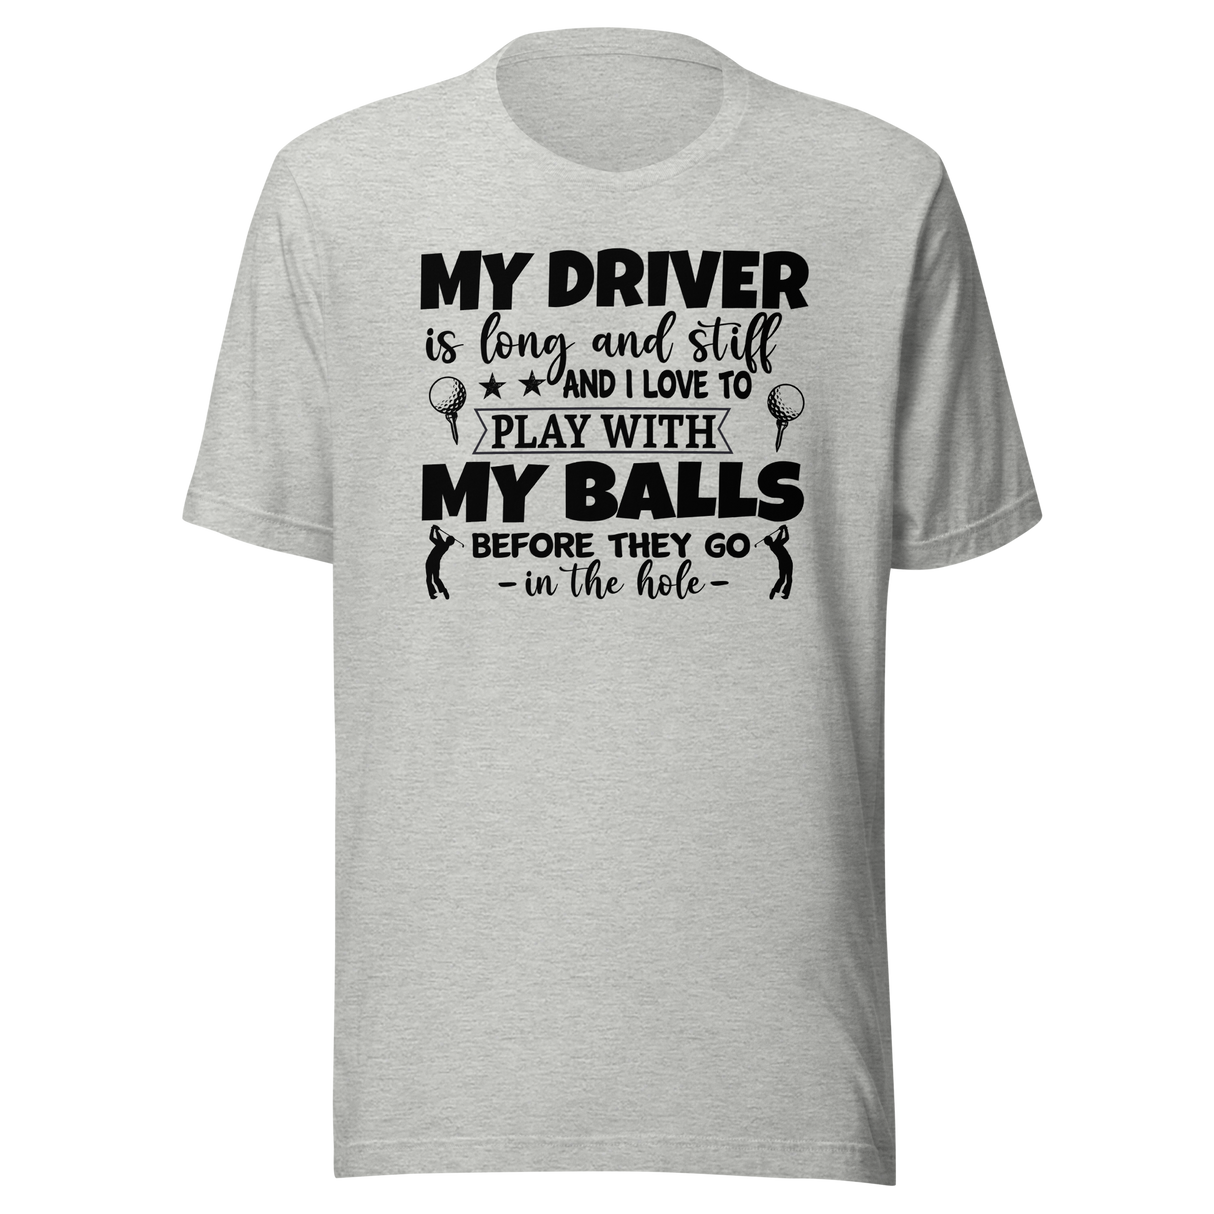 my-driver-is-hard-and-stiff-and-i-love-to-play-with-my-balls-before-they-go-in-the-hole-sports-tee-golf-t-shirt-sports-tee-golf-t-shirt-driver-tee#color_athletic-heather